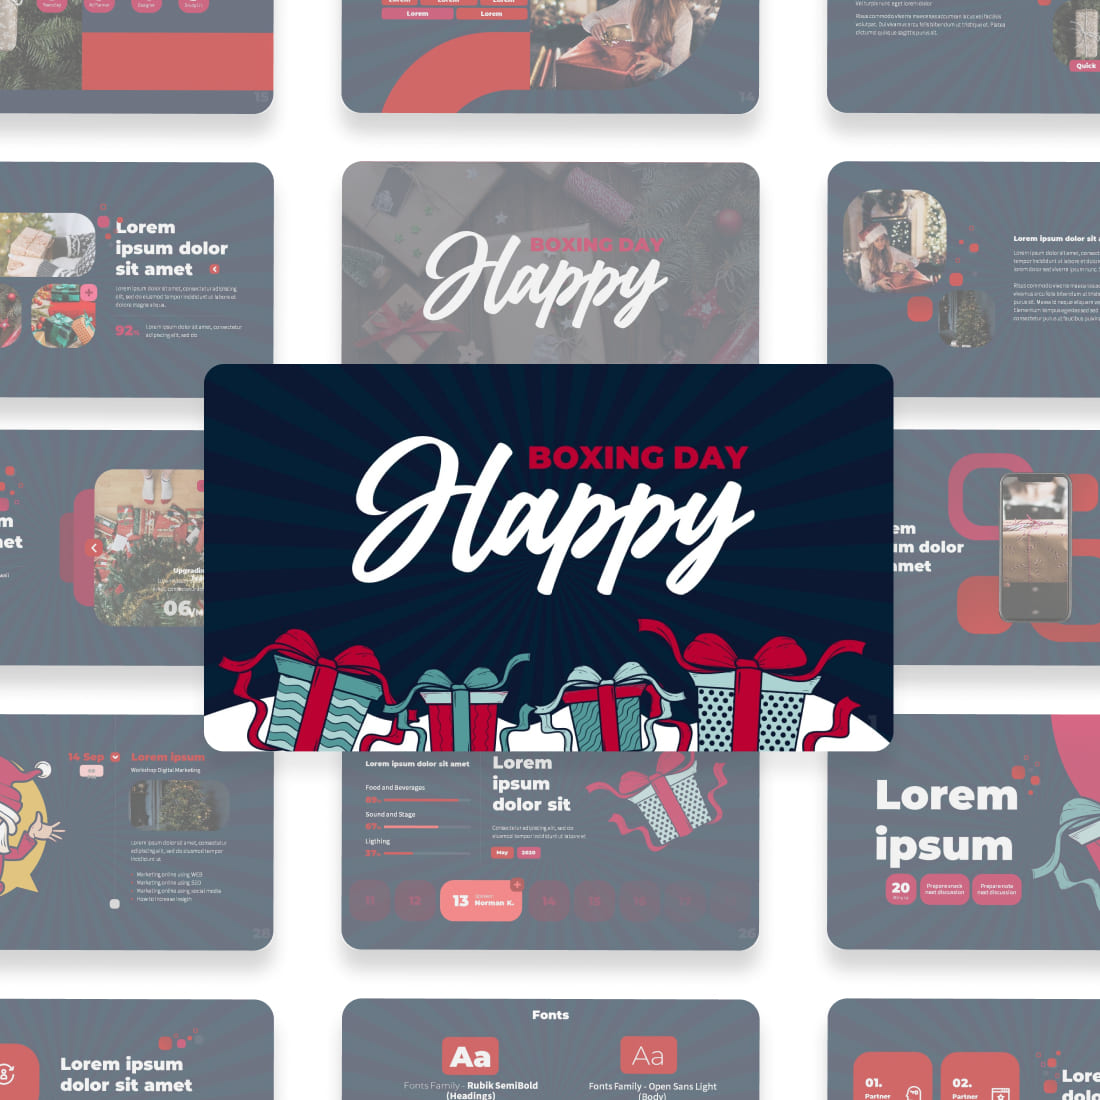 Happy Boxing DayPowerpoint Template cover.